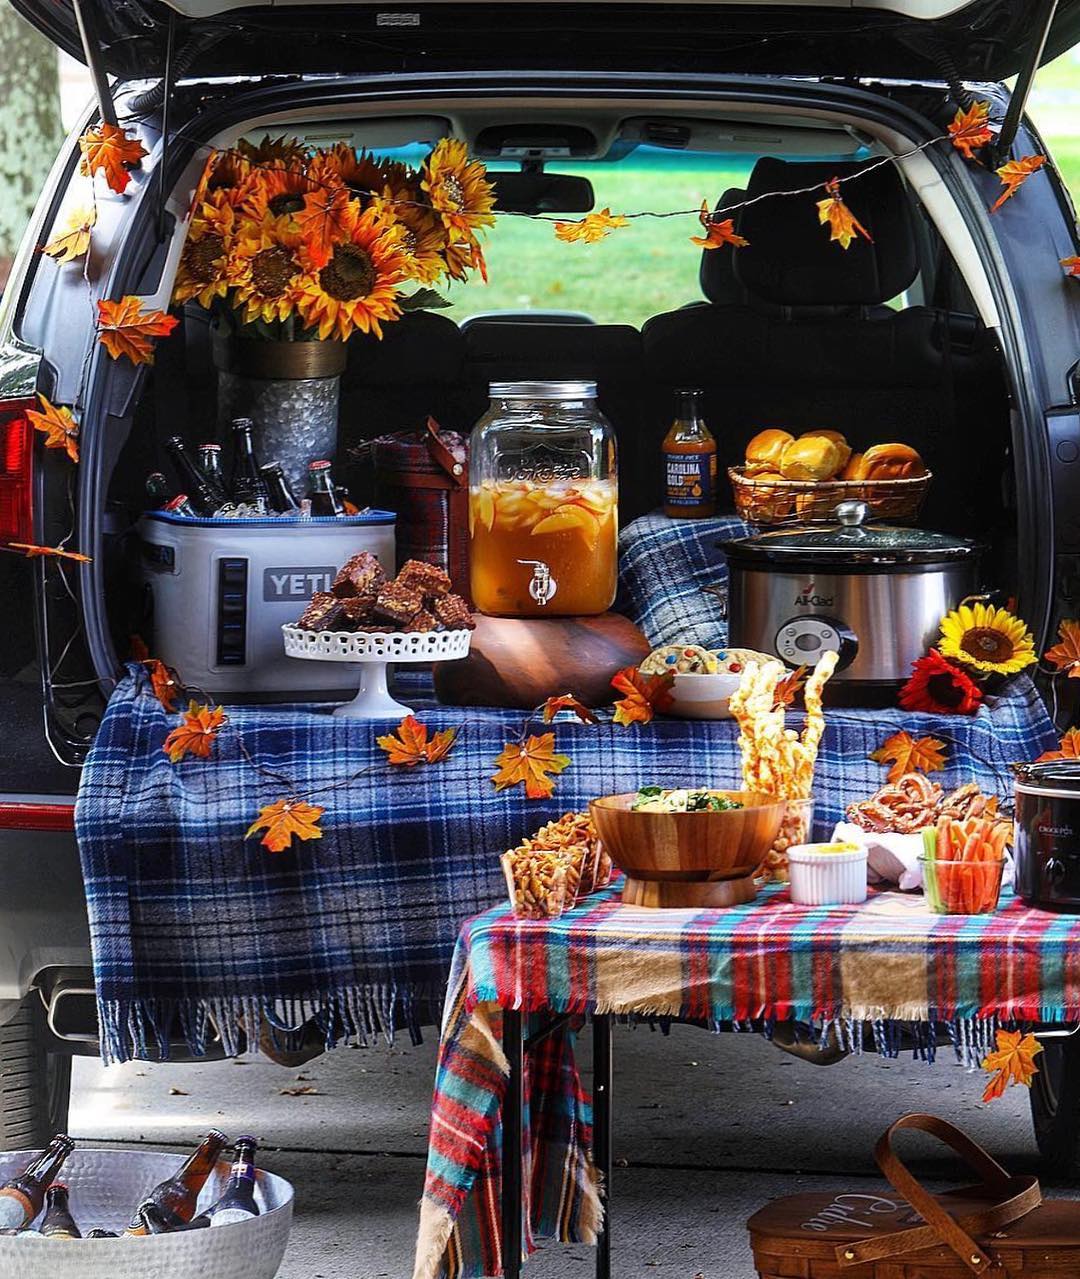 Tailgating food and beverage in the back of an SUV with fall decorations. Photo by instagram user @williamssonoma